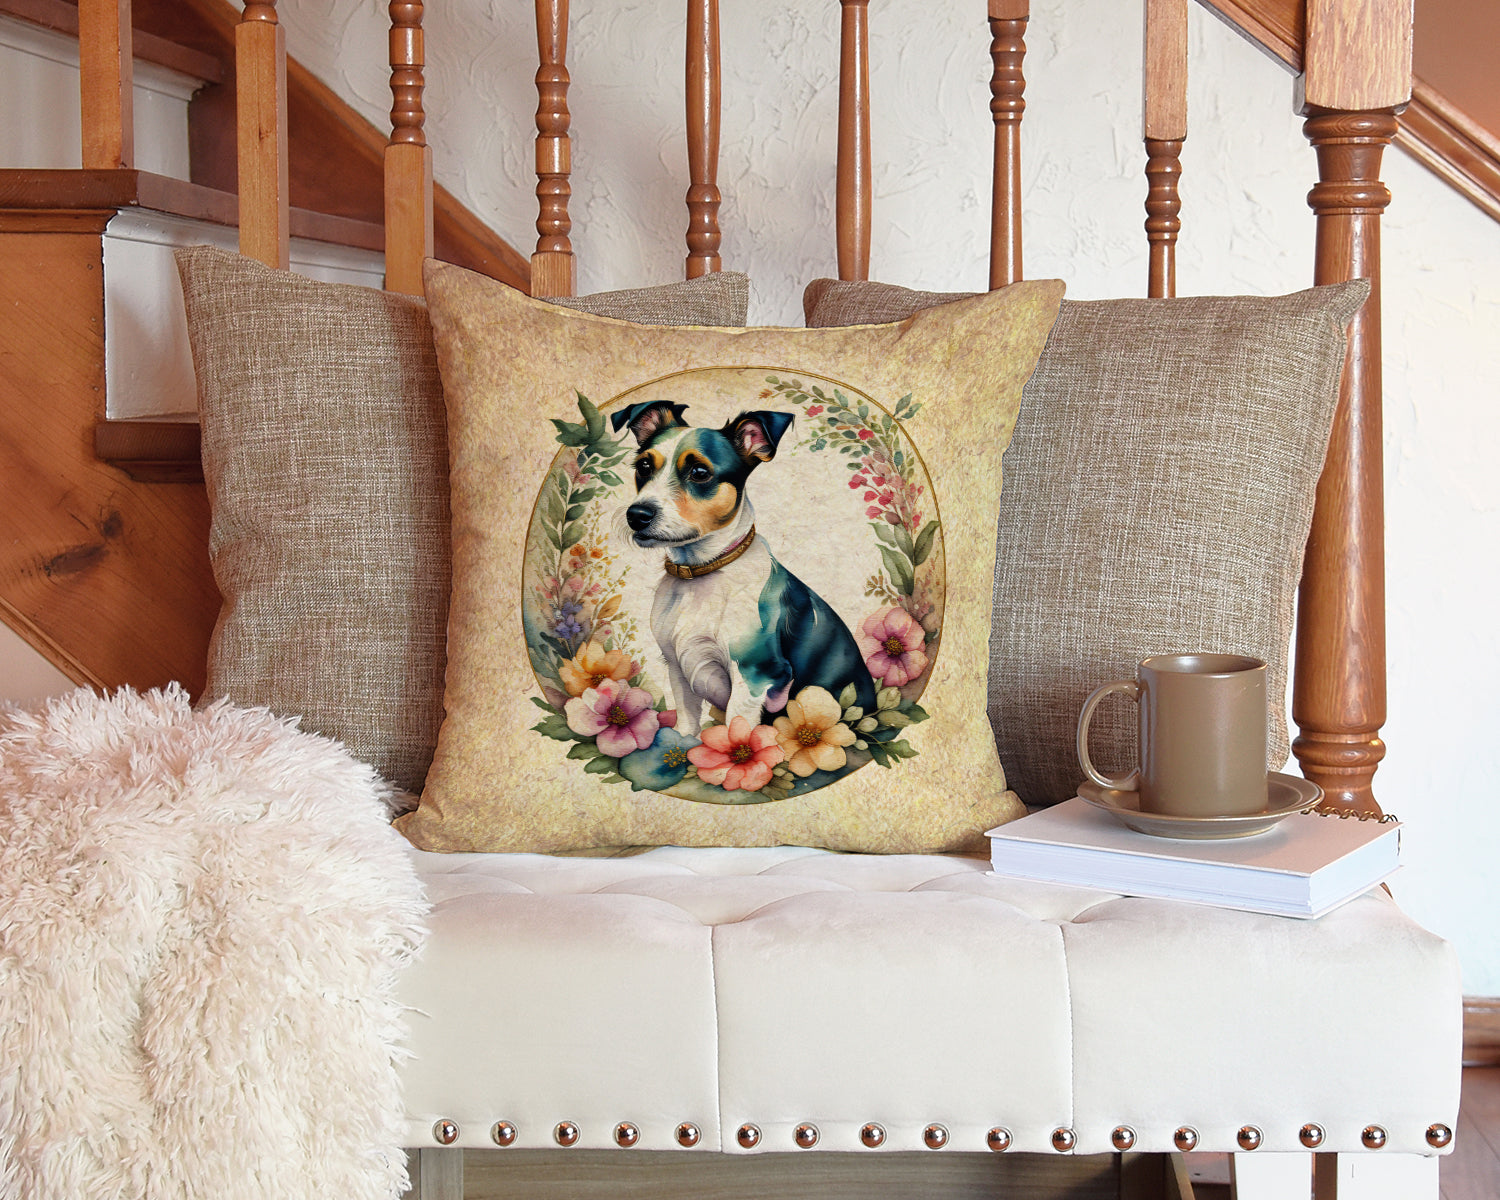 Jack Russell Terrier and Flowers Fabric Decorative Pillow  the-store.com.